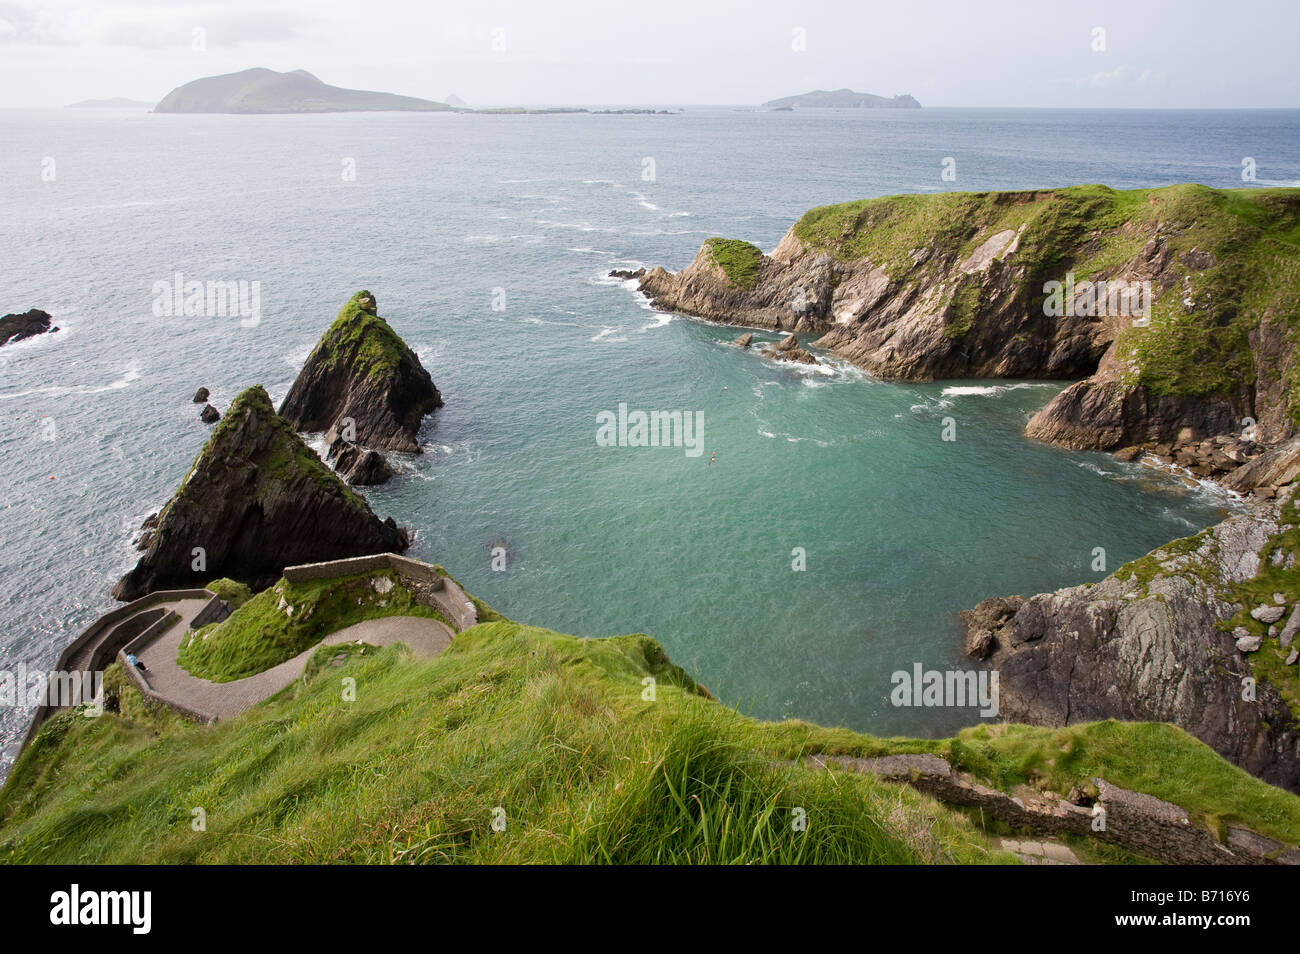 Minimal Harbour. The small partially protected harbour that serves the Blasket Islands and the winding path down to it Stock Photo